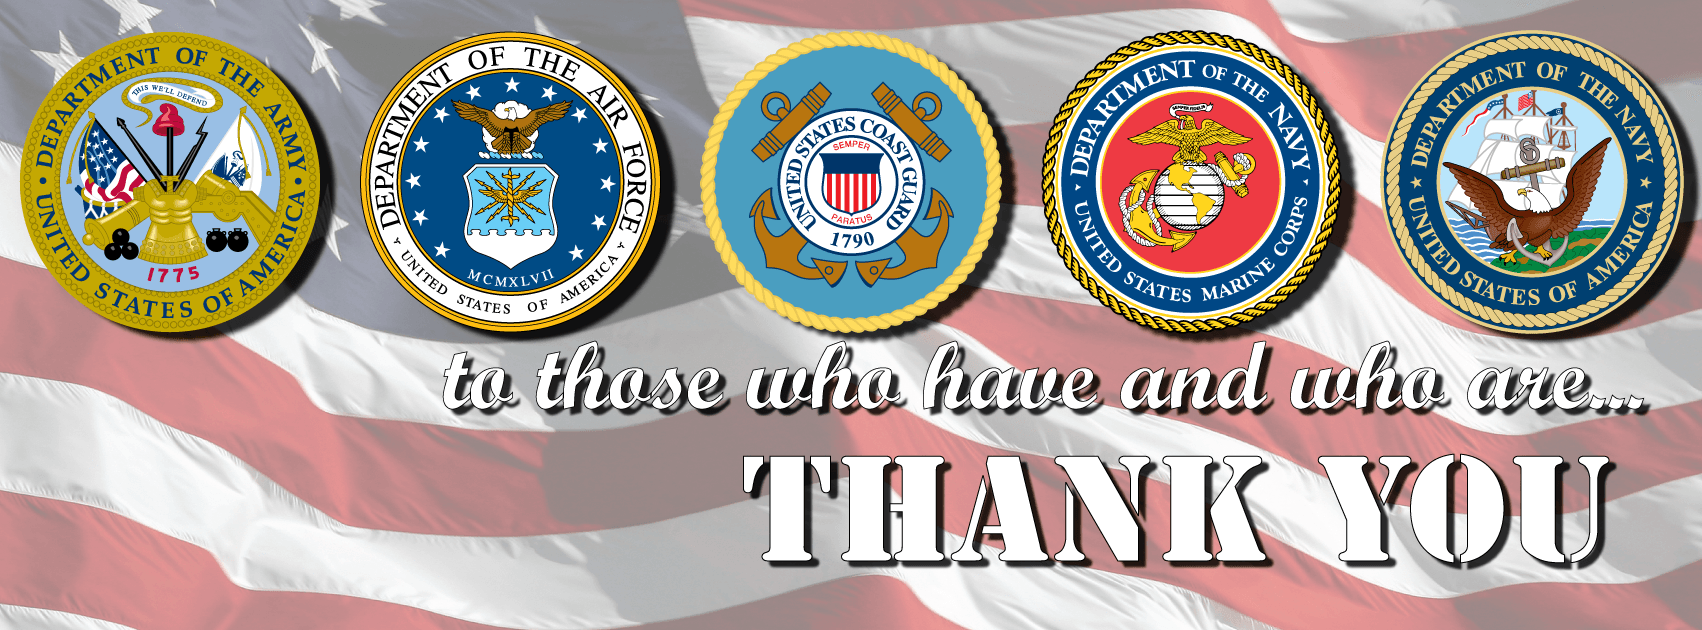 Thank you-Veterans Day